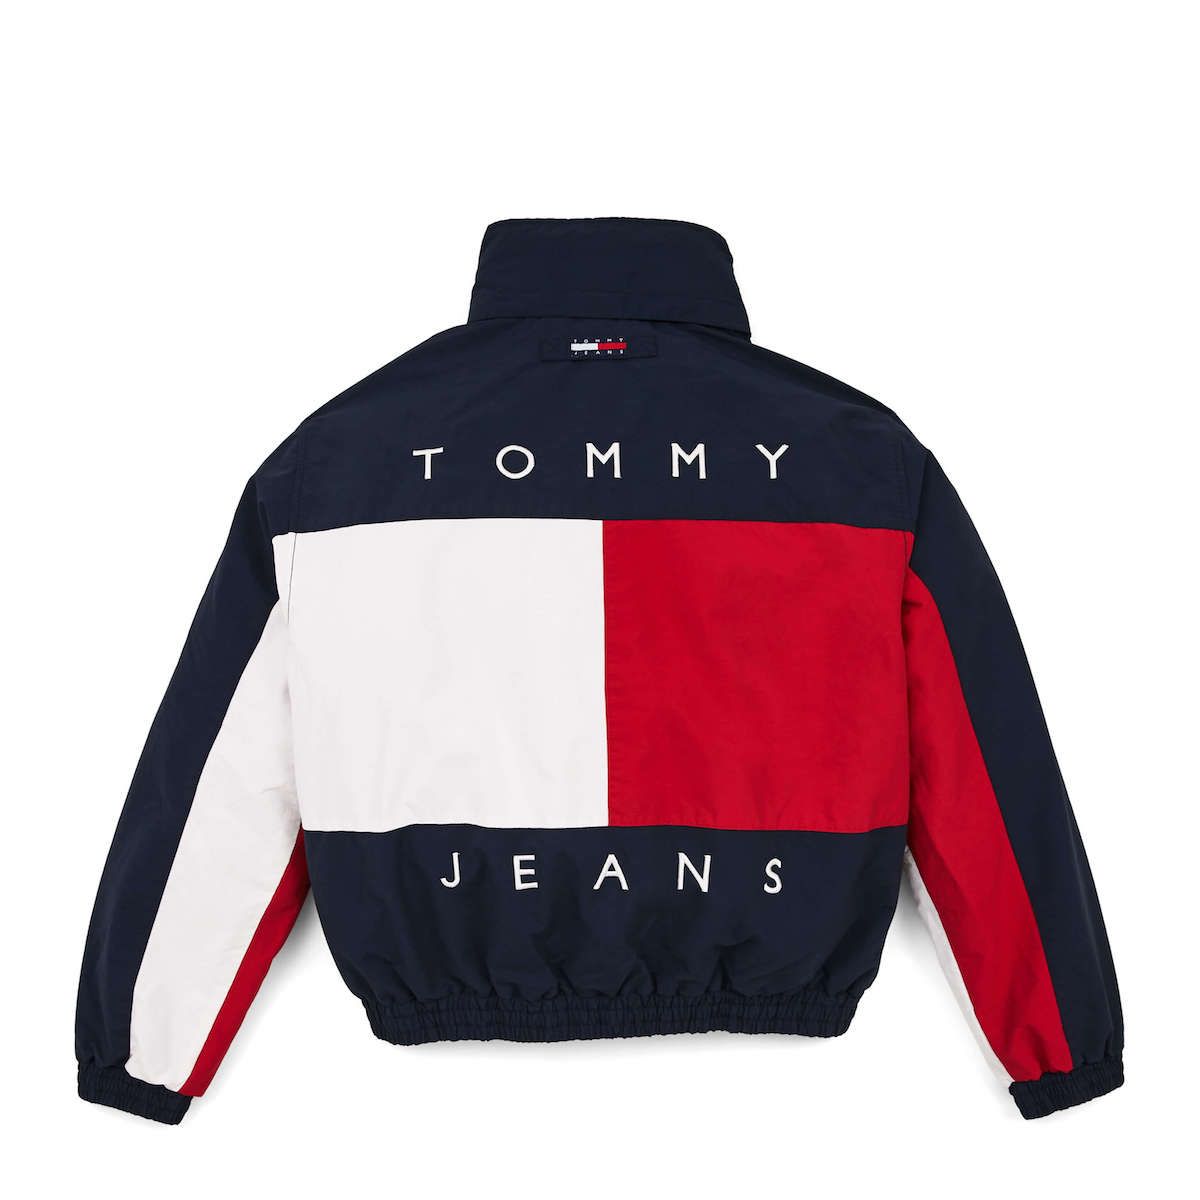 Tommy Hilfiger goes into the archive 